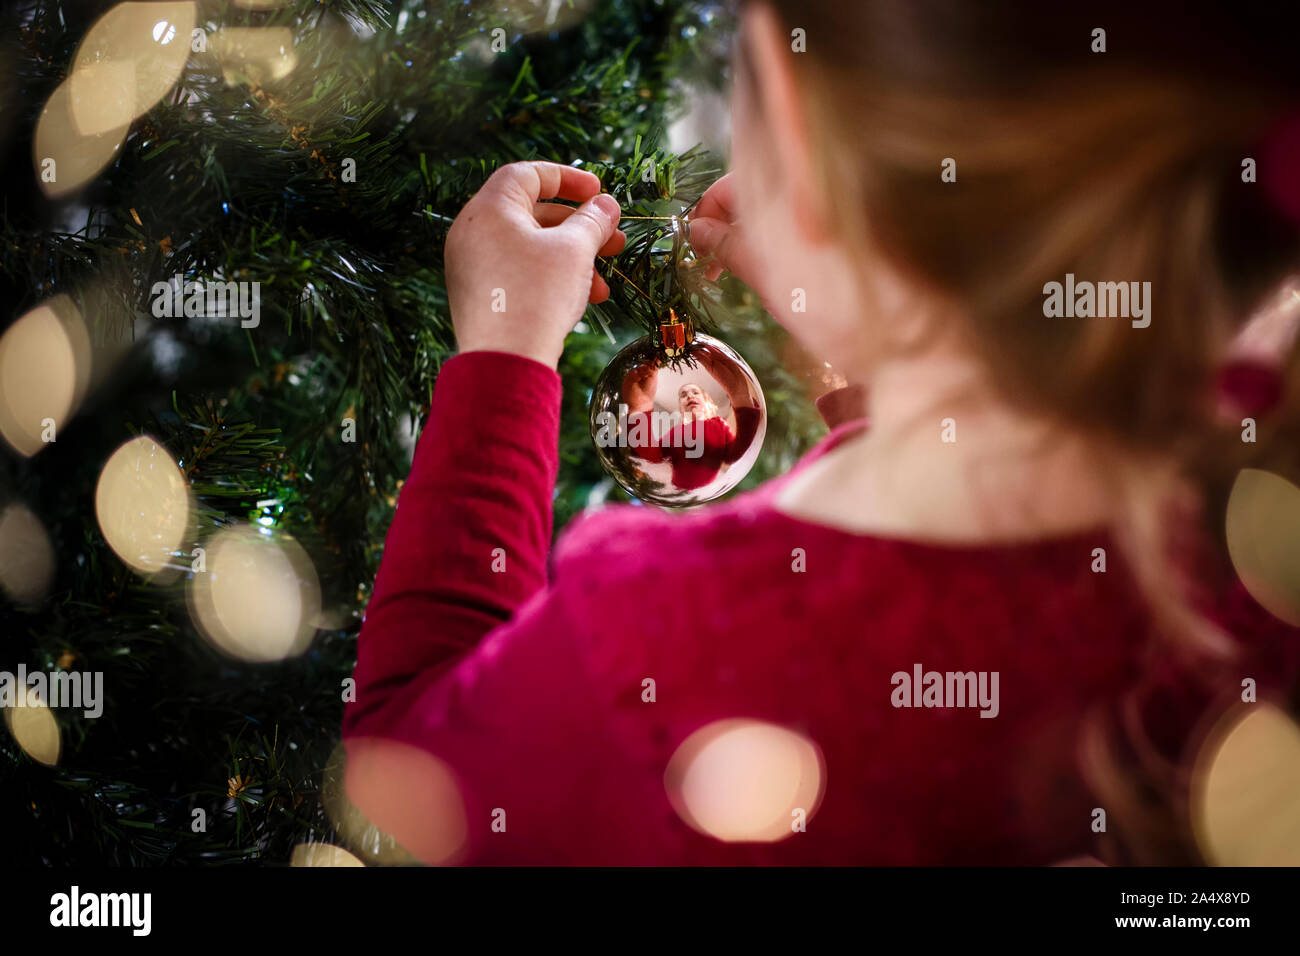 Festive image of girl decorating Christmas tree reflection in bauble Stock Photo